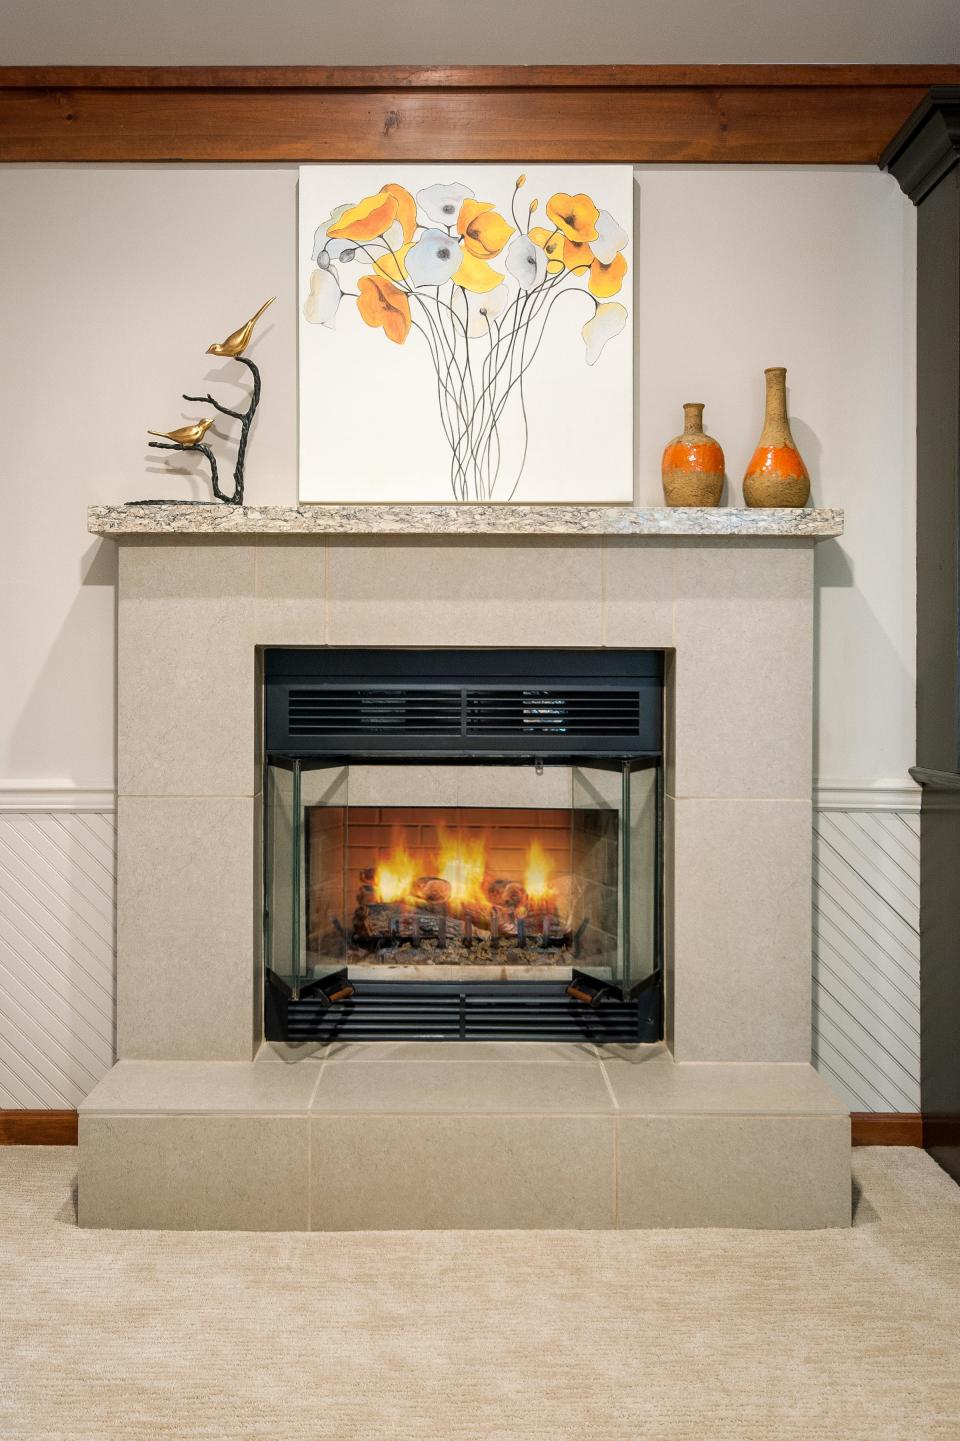 The old dark creek rock fireplace was replaced with tile and a custom-made, light-colored granite mantel in this redesigned living room in Louisville.